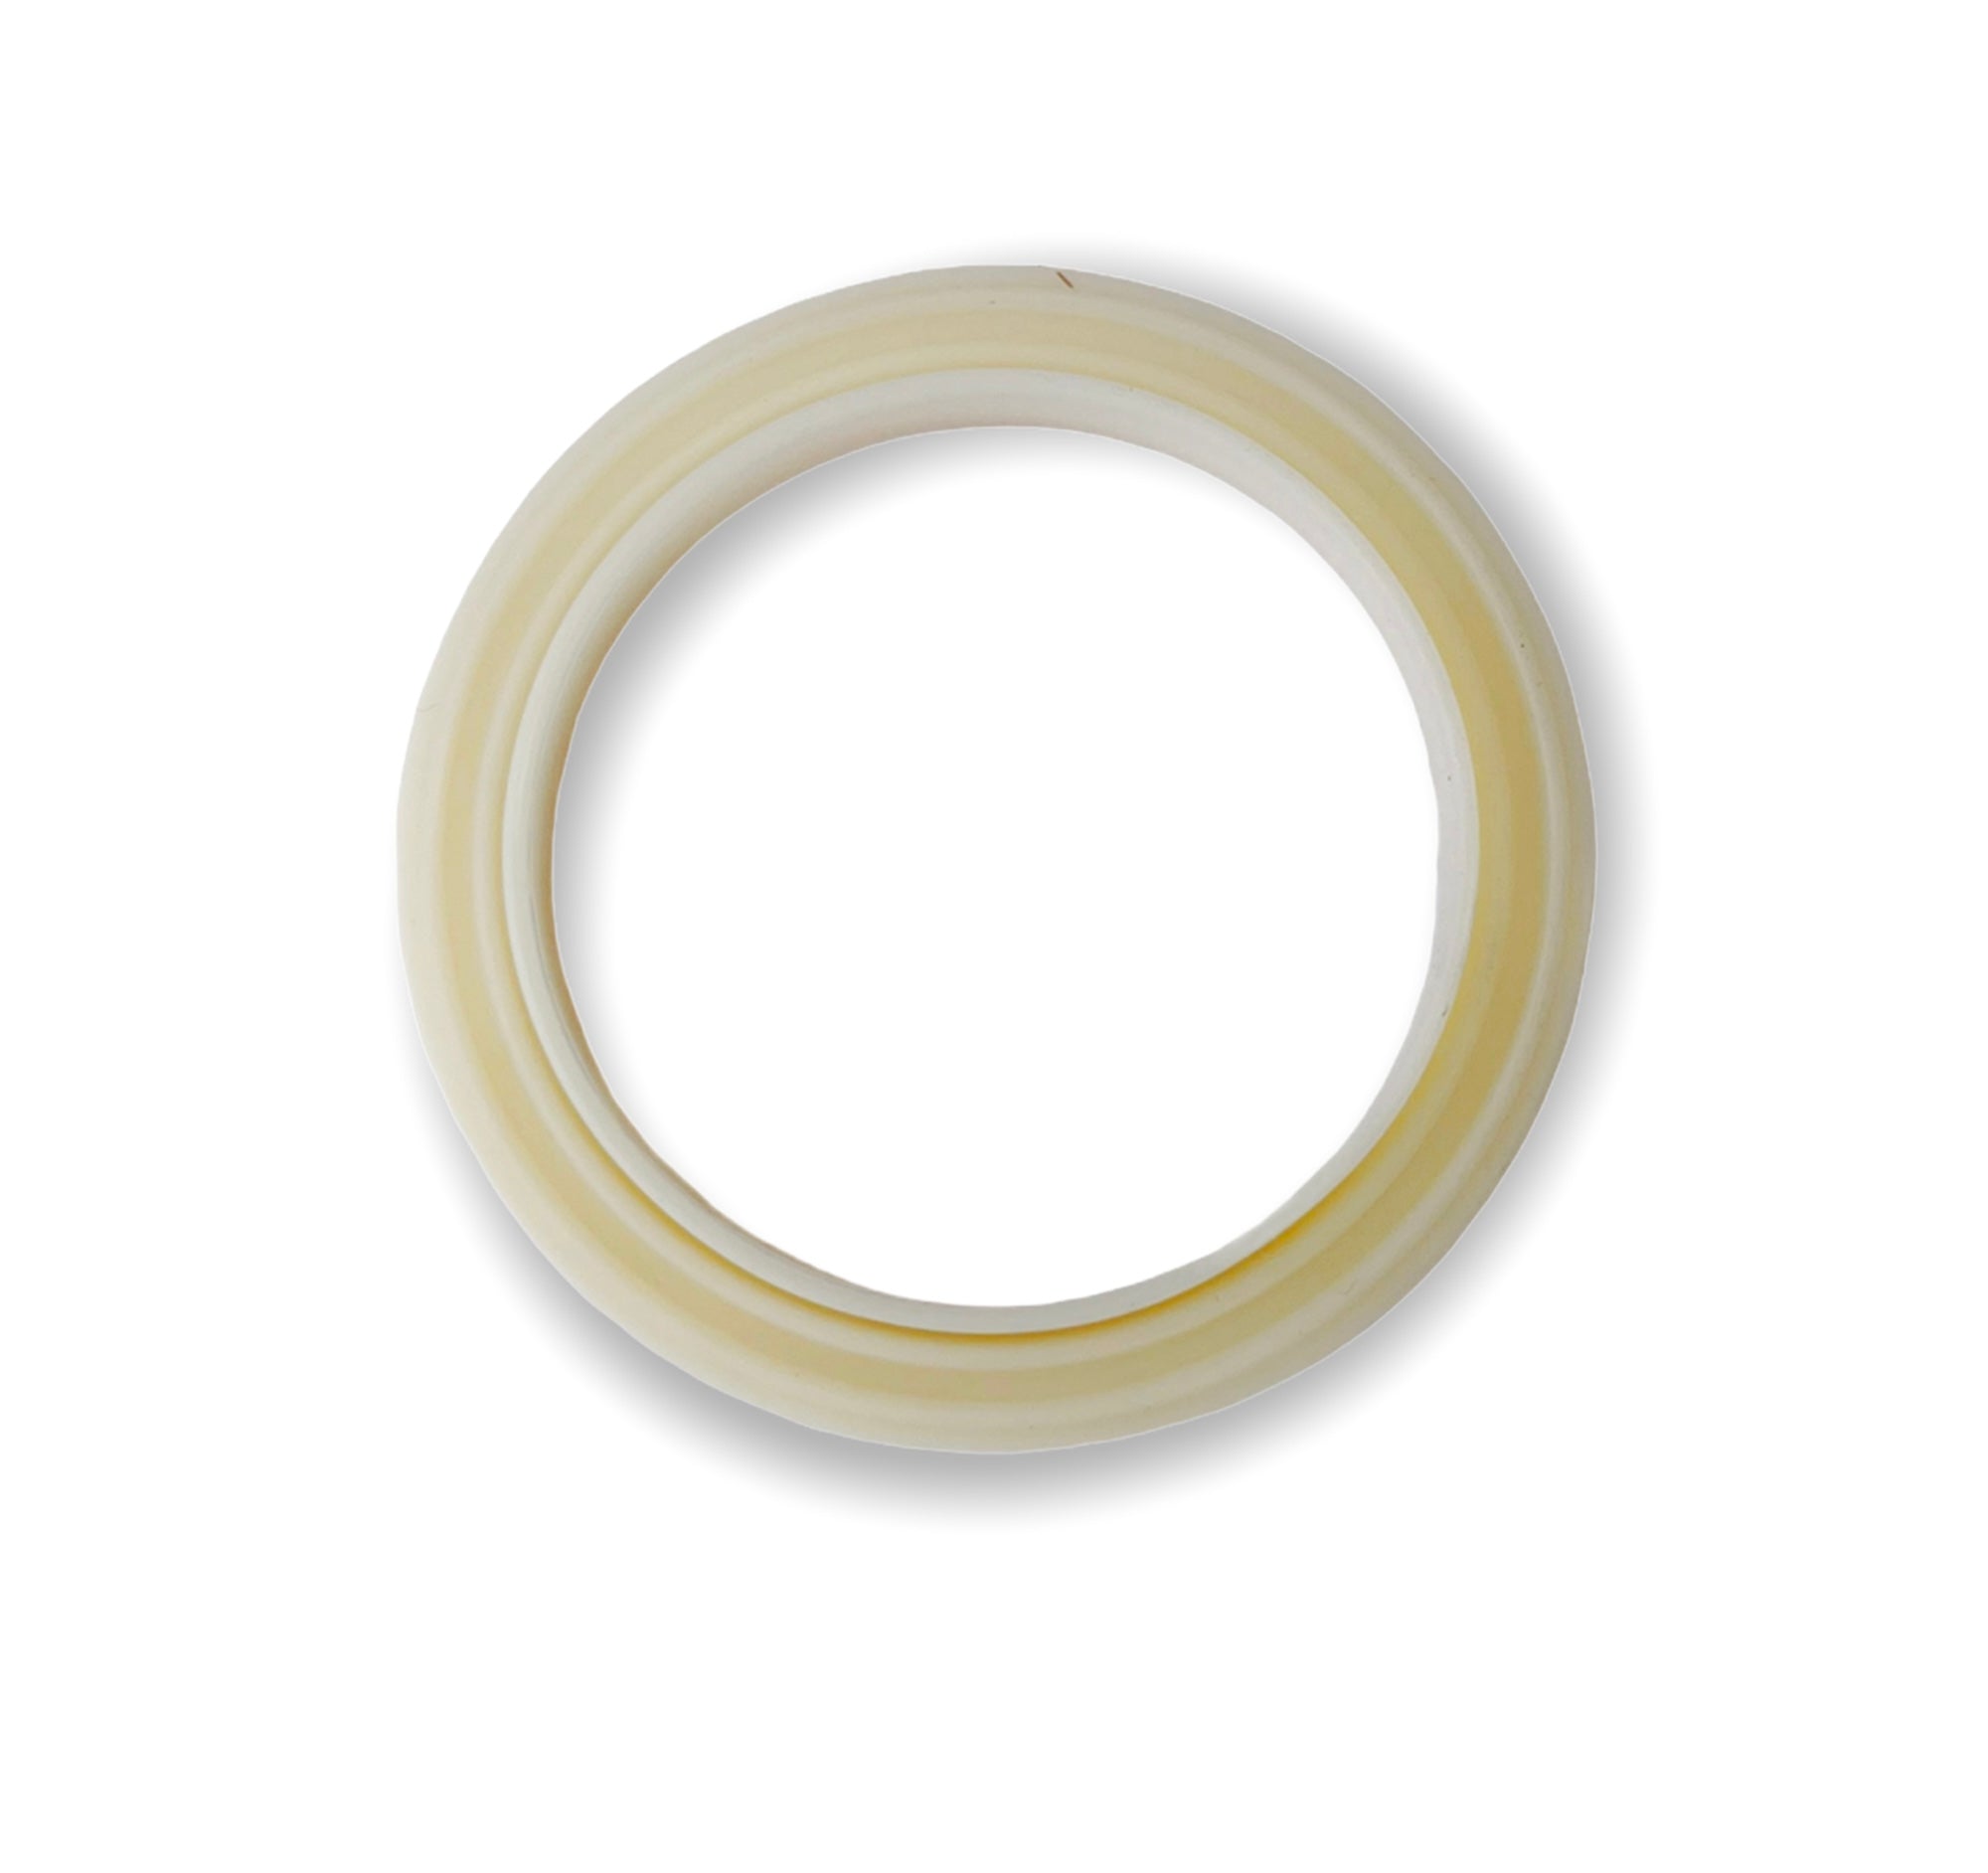 54mm Steam Ring - BES840/860/870 (BPBES86002.6)  OEM part  Group seal for Breville home machines  Suitable for BES840, 860 and 870  Specifications:   external ø 65 mm internal ø 49 mm thickness 6.8 mm thickness with lip 10 mm for units 54 mm in white/yellow silicone Suitable for Breville BES870, BES878, BES880 SKU: SP0001474 (BPBES86002.6)